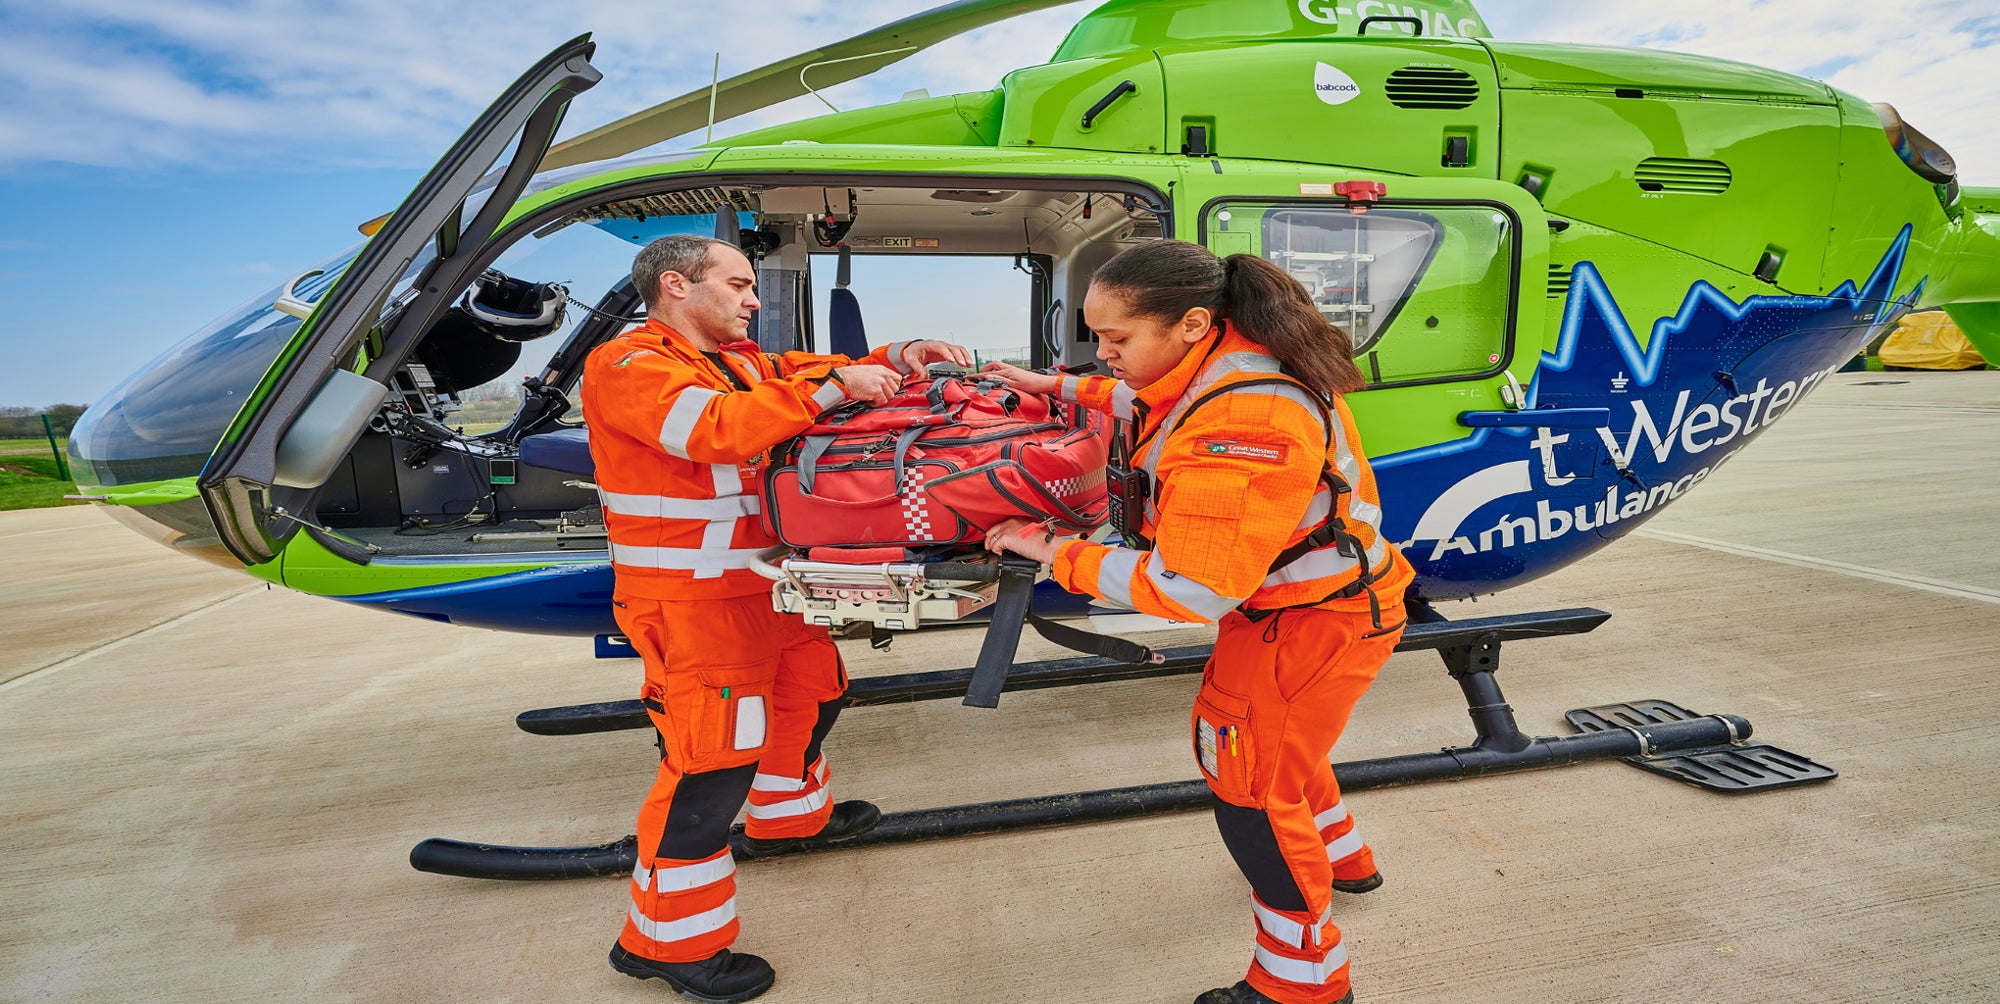 Why ZULUDIVER is supporting Great Western Air Ambulance